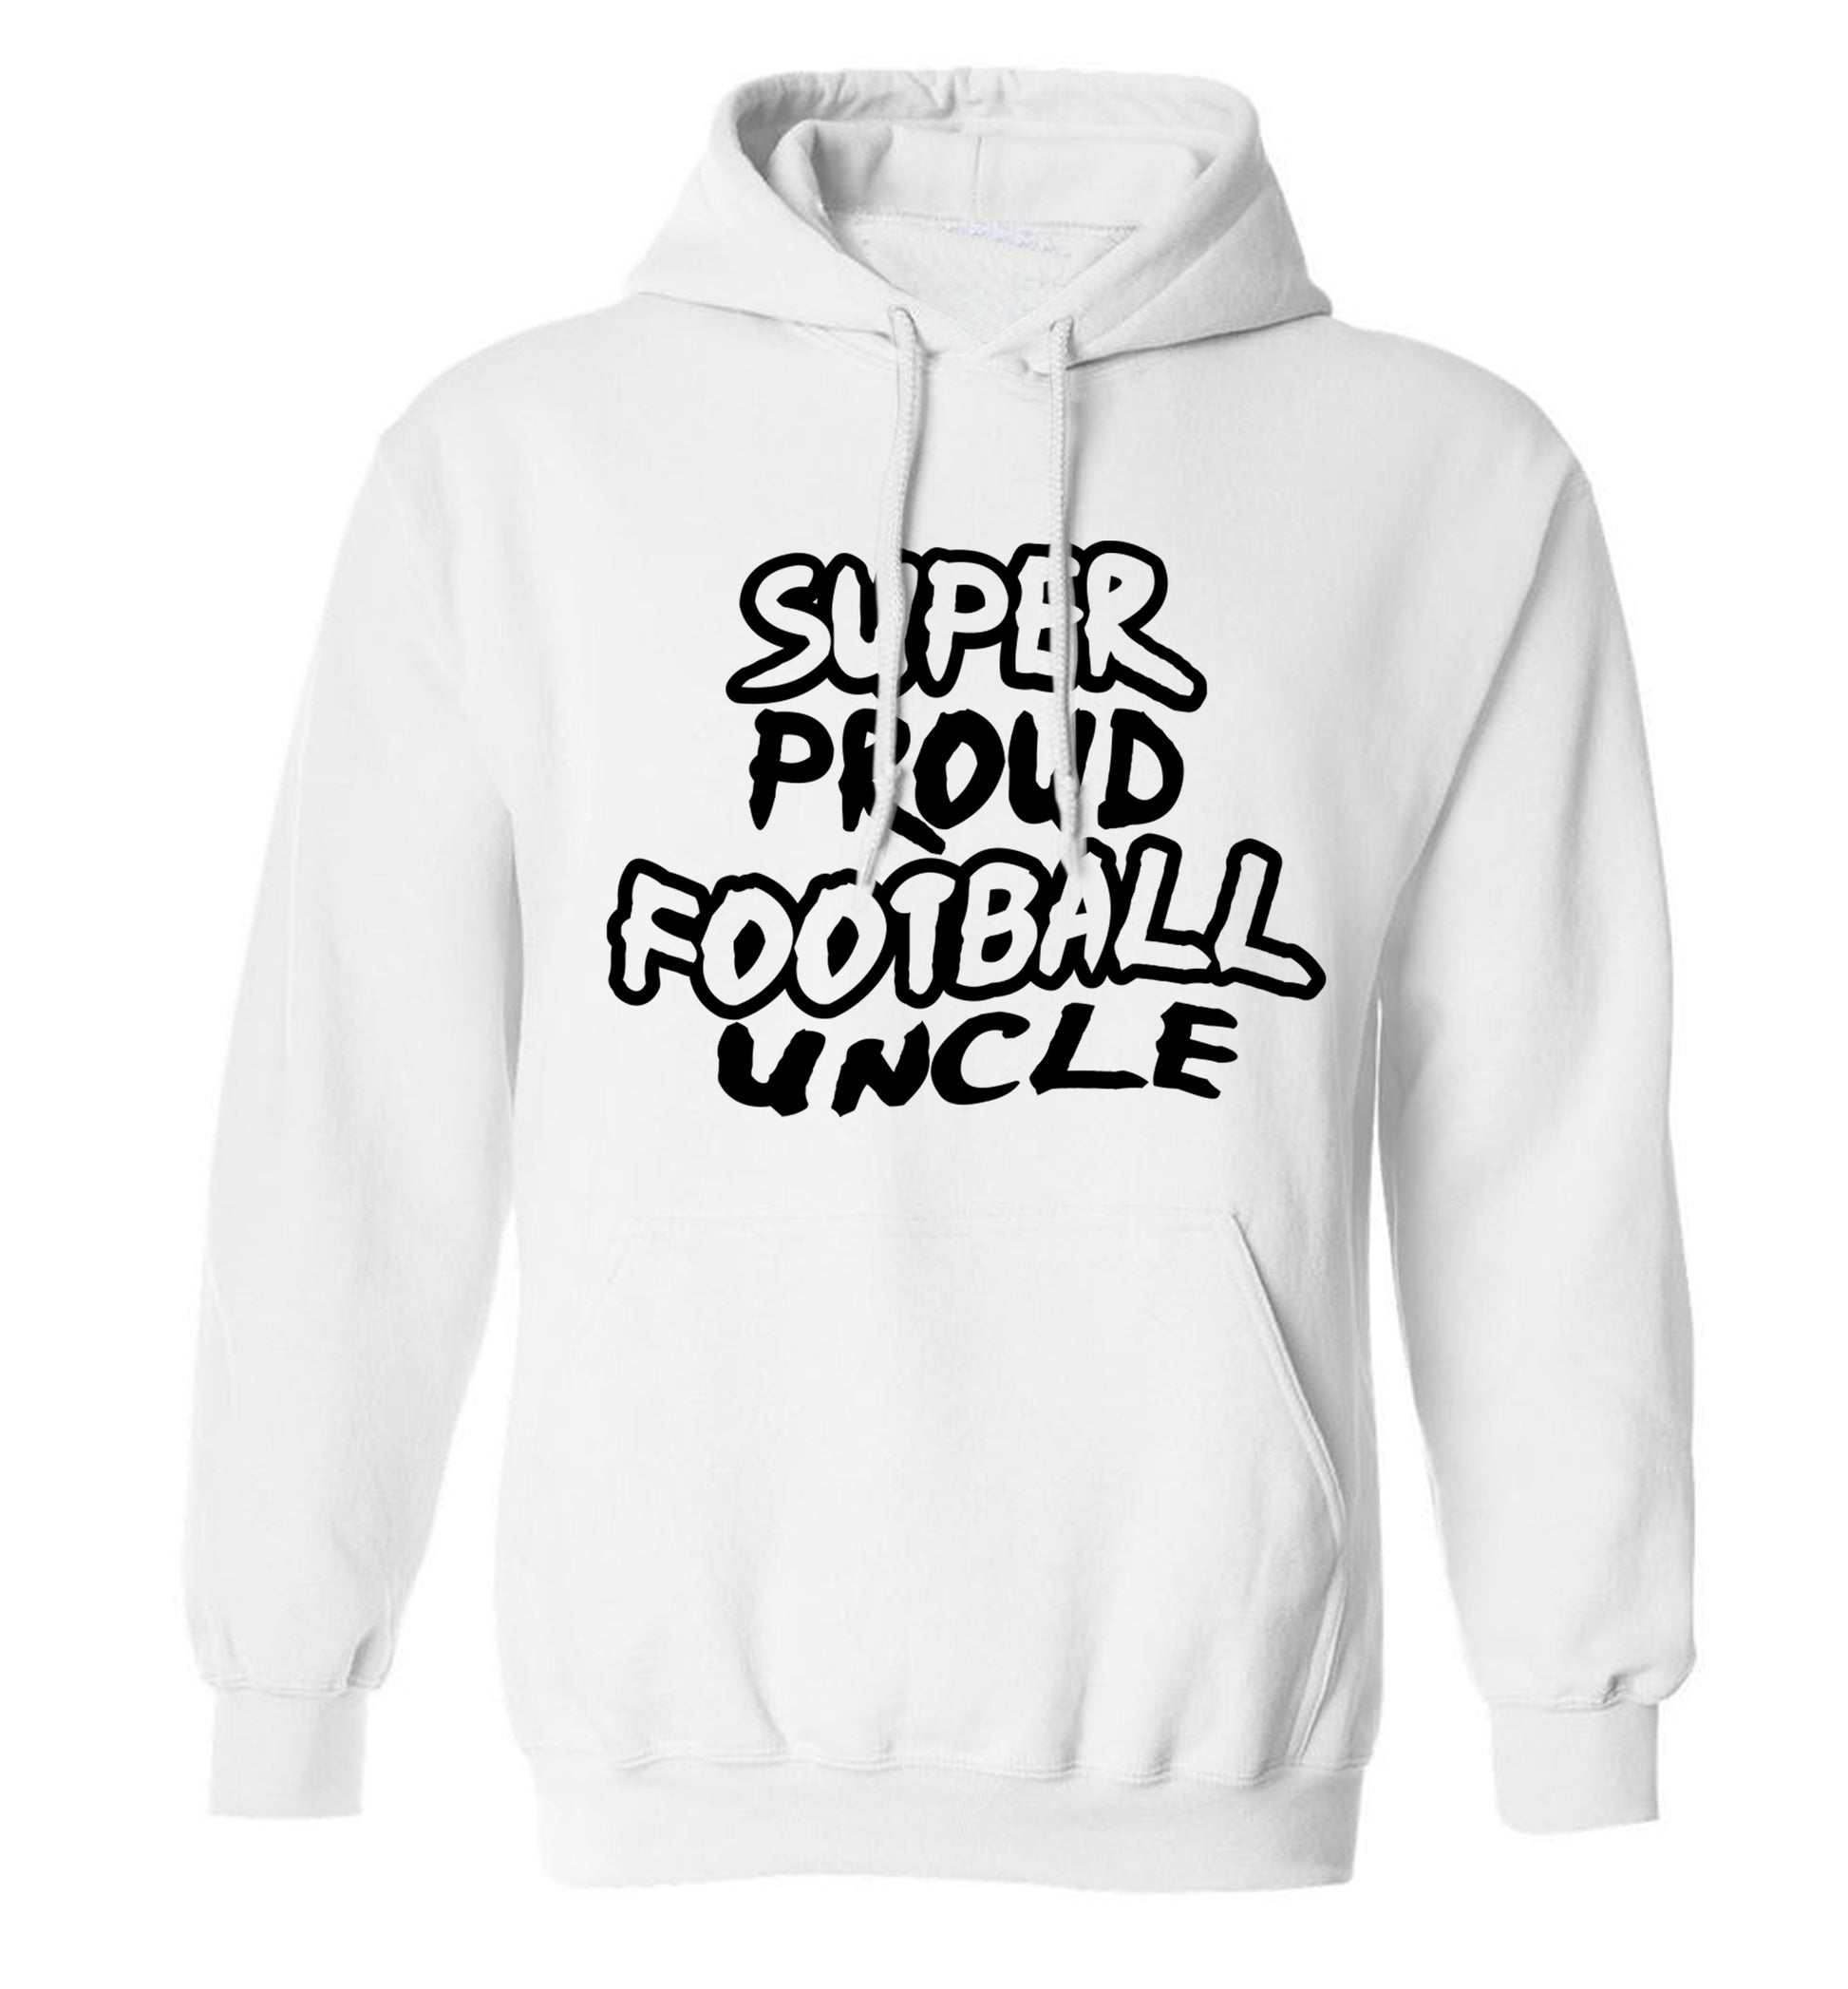 Super proud football uncle adults unisexwhite hoodie 2XL